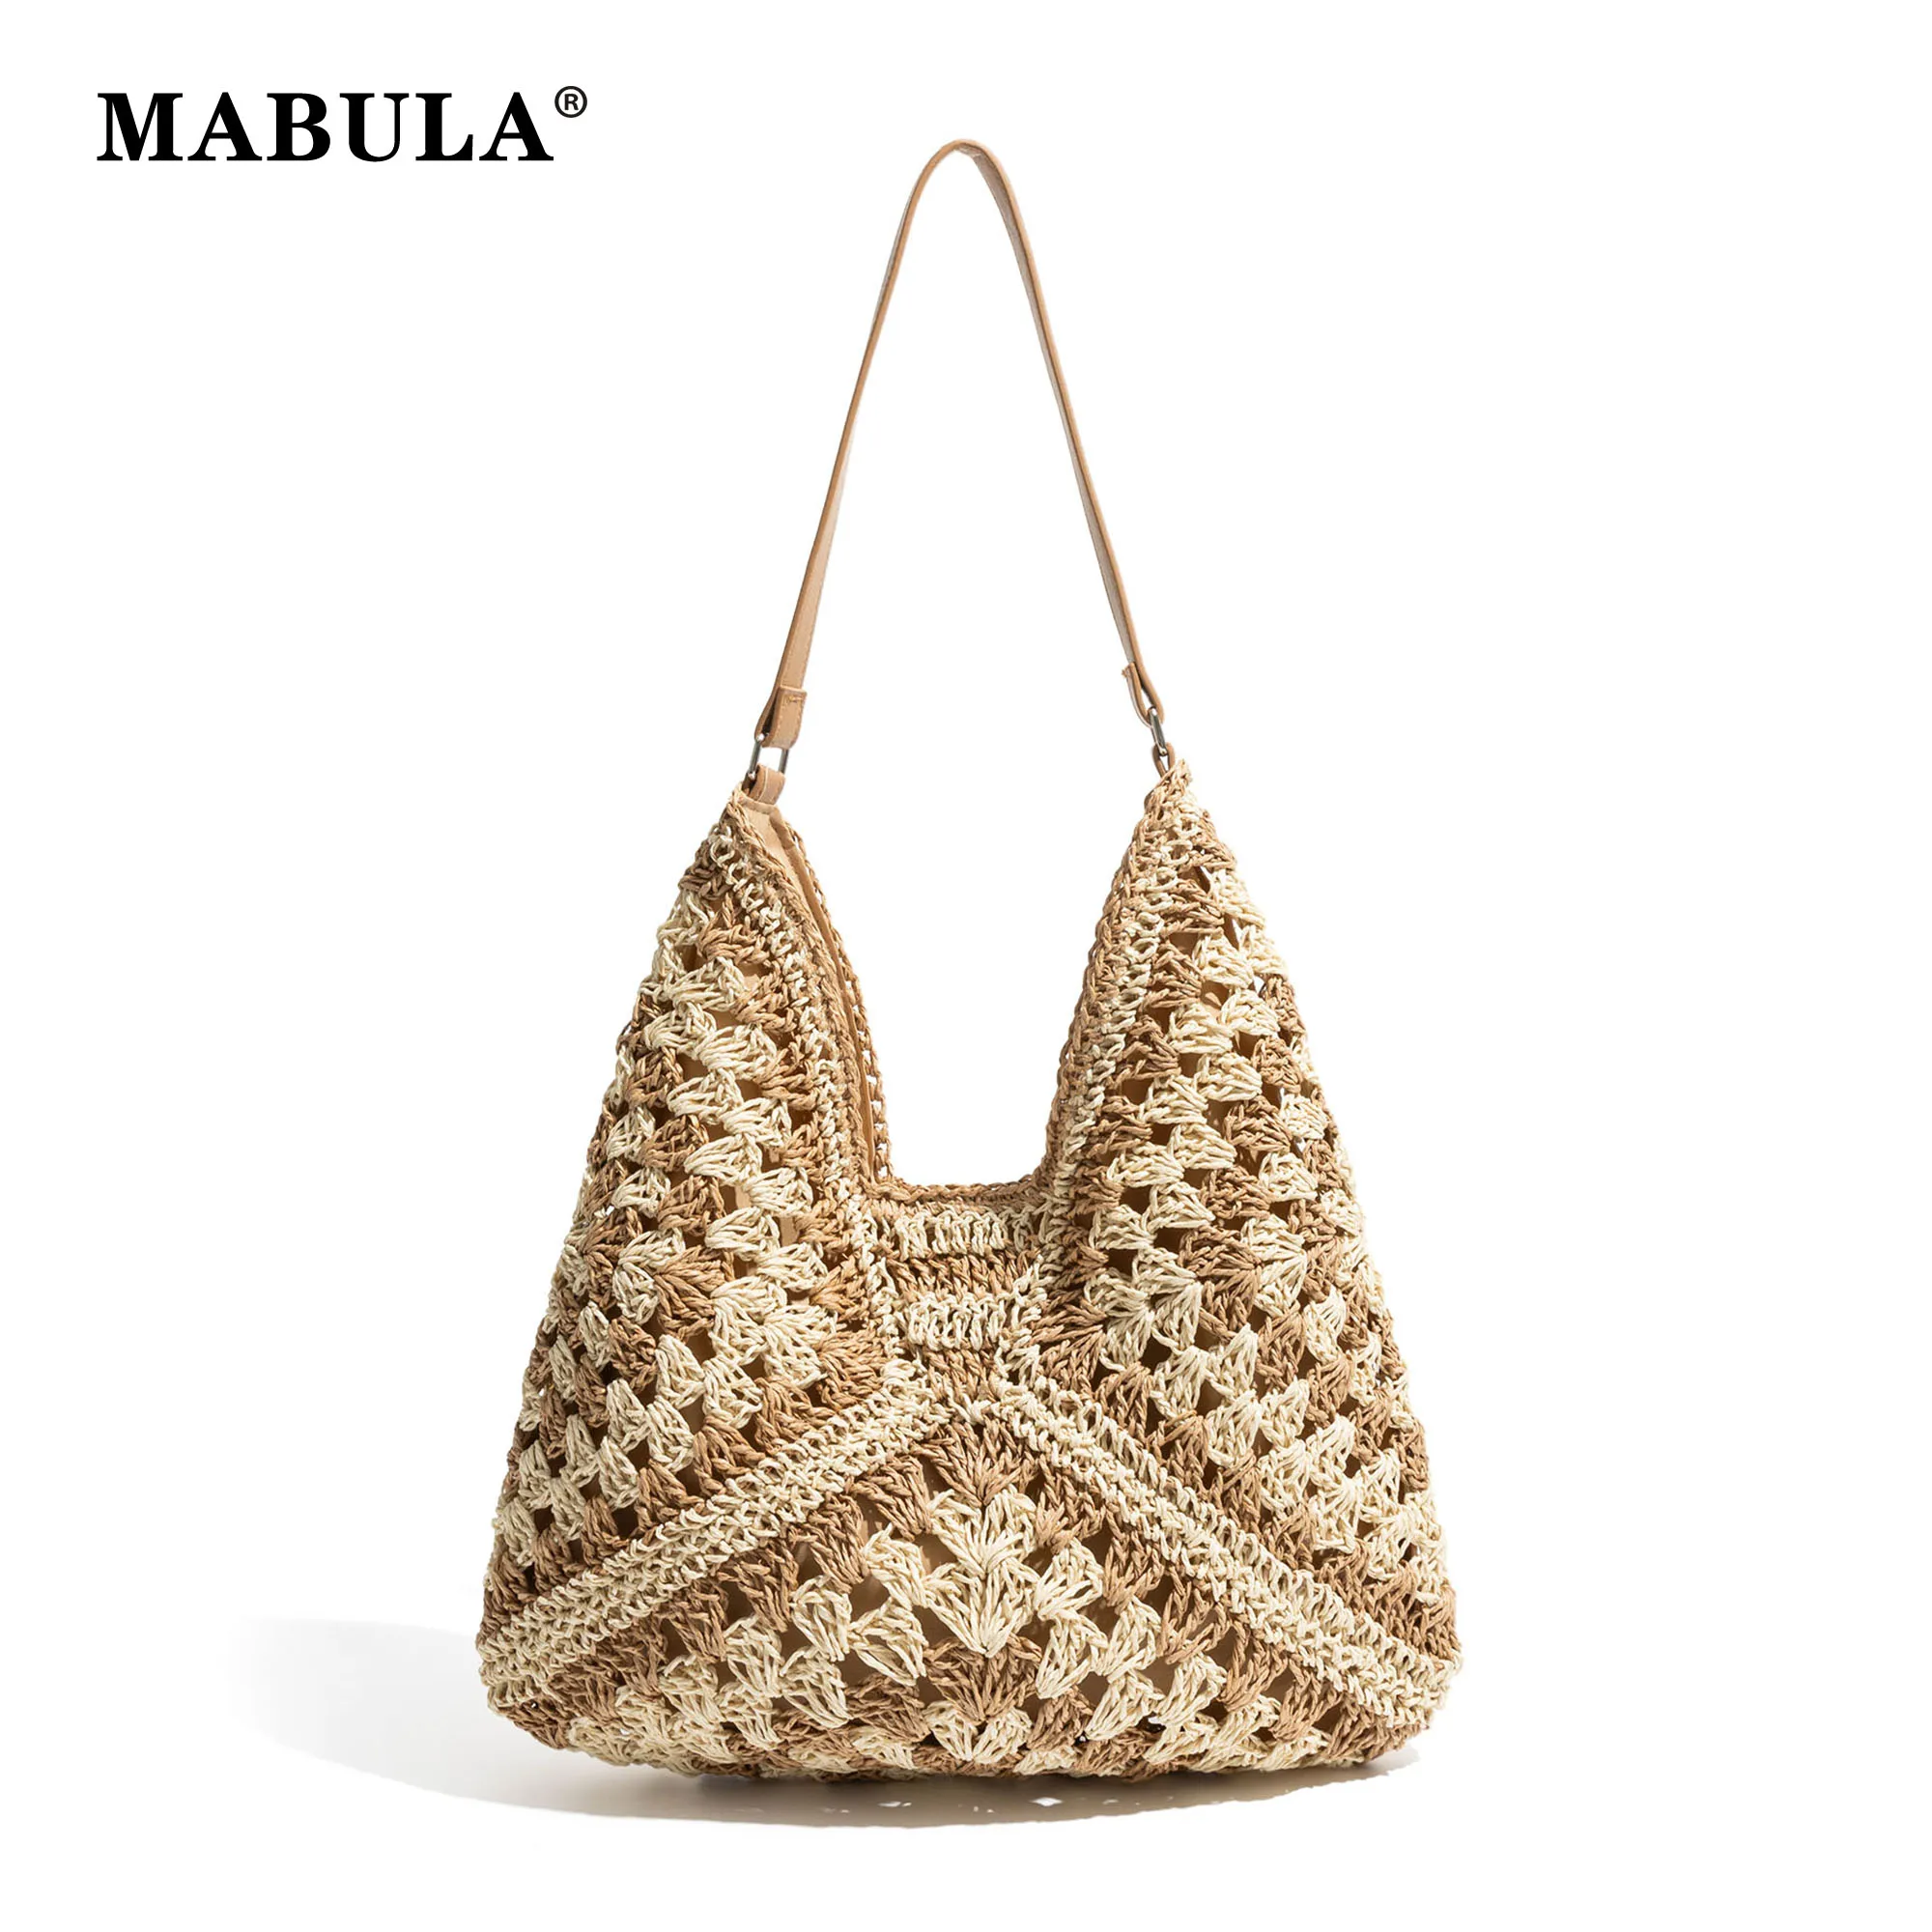 MABULA Vintage Bohemian Straw Tote Shoulder Bag For Woman Handwoven Beach Vacation Top Handle Bag Lightweight Female Purse